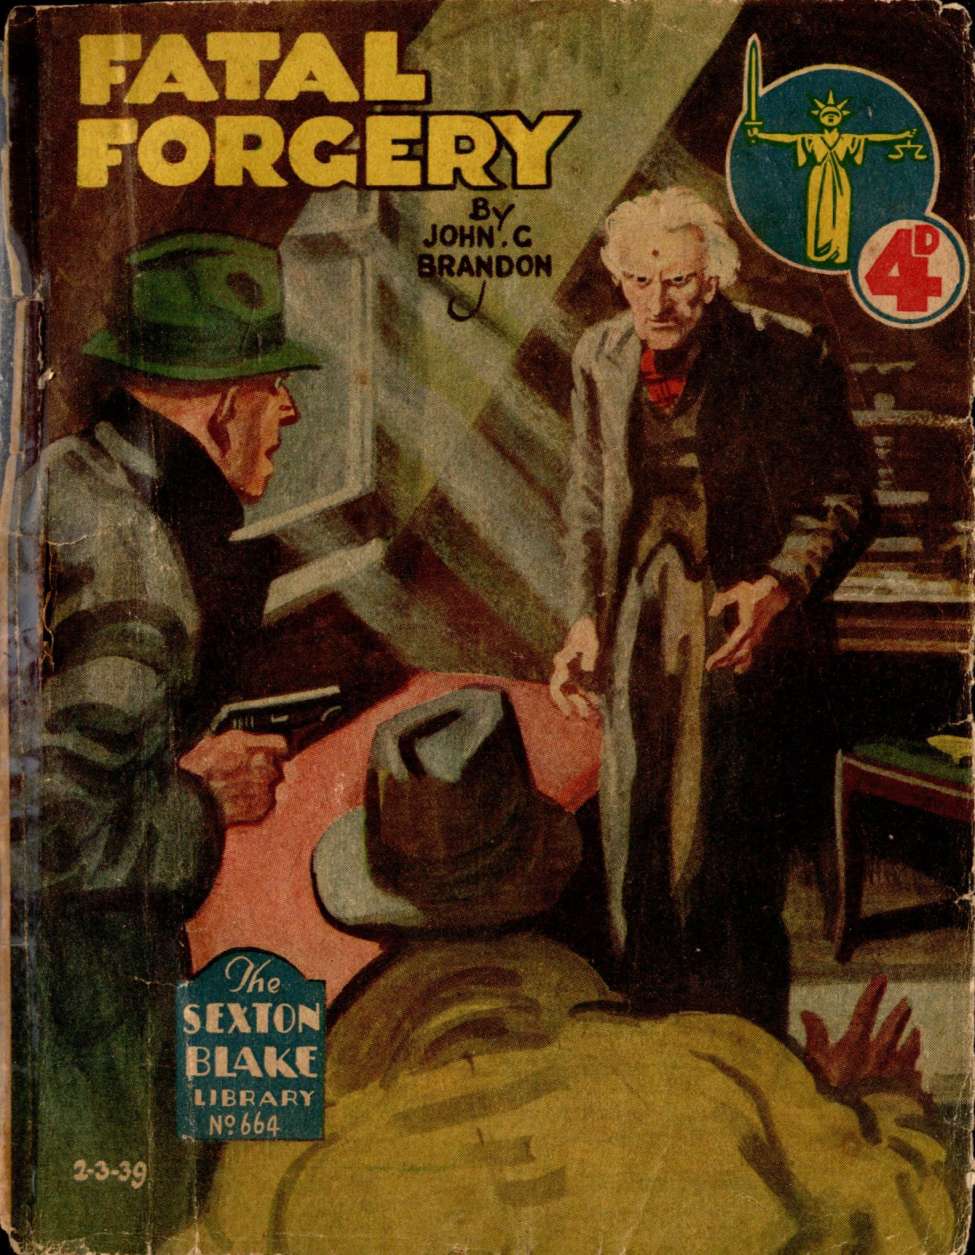 Comic Book Cover For Sexton Blake Library S2 664 - Fatal Forgery